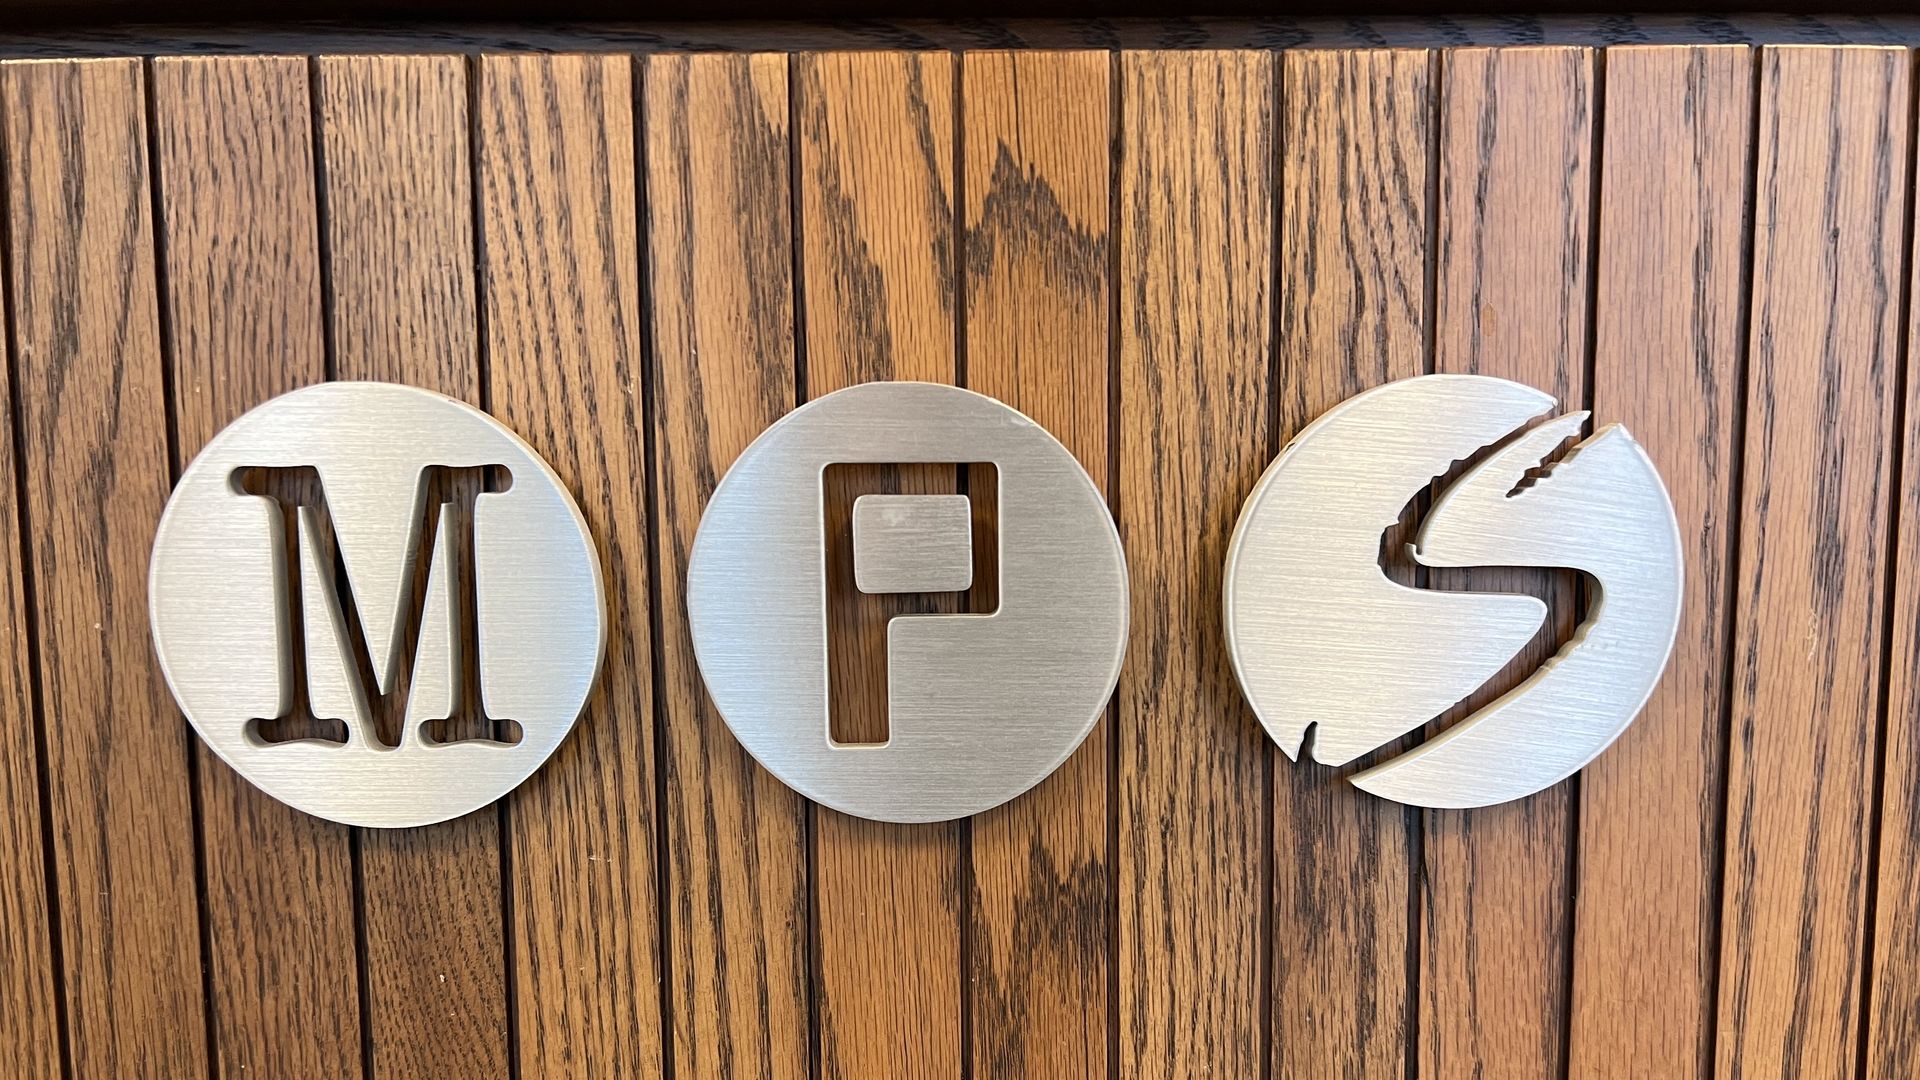 The Minneapolis Public Schools logo: a stylized 'M', 'P' and 'S' all enclosed within circles.